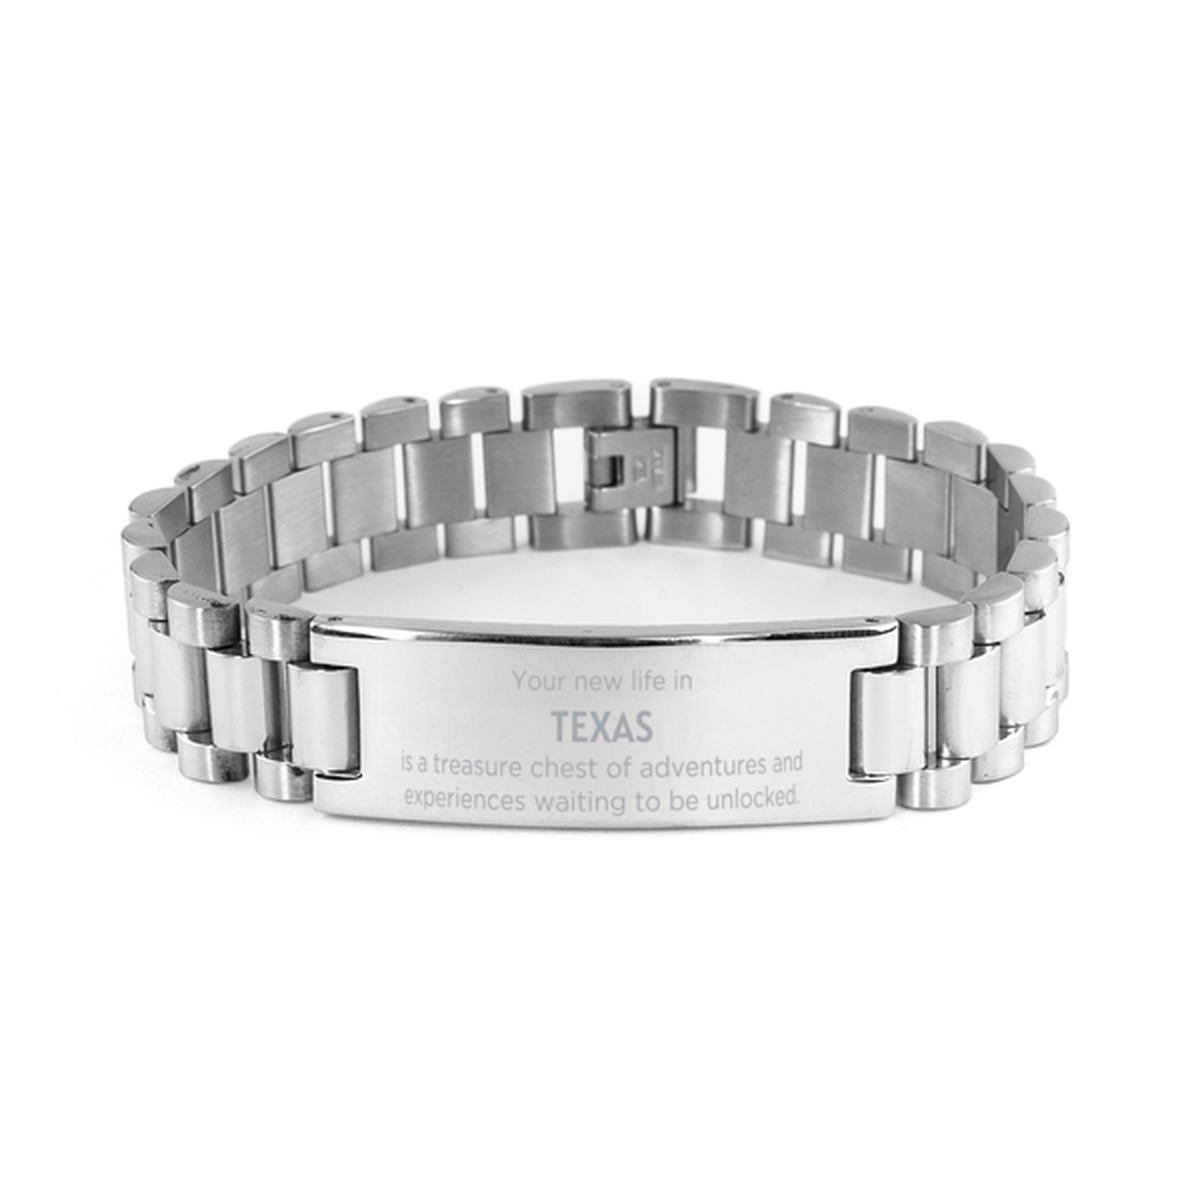 Moving to Texas Gifts, Your new life in Texas, Long Distance Texas Christmas Ladder Stainless Steel Bracelet For Men, Women, Friends, Coworkers